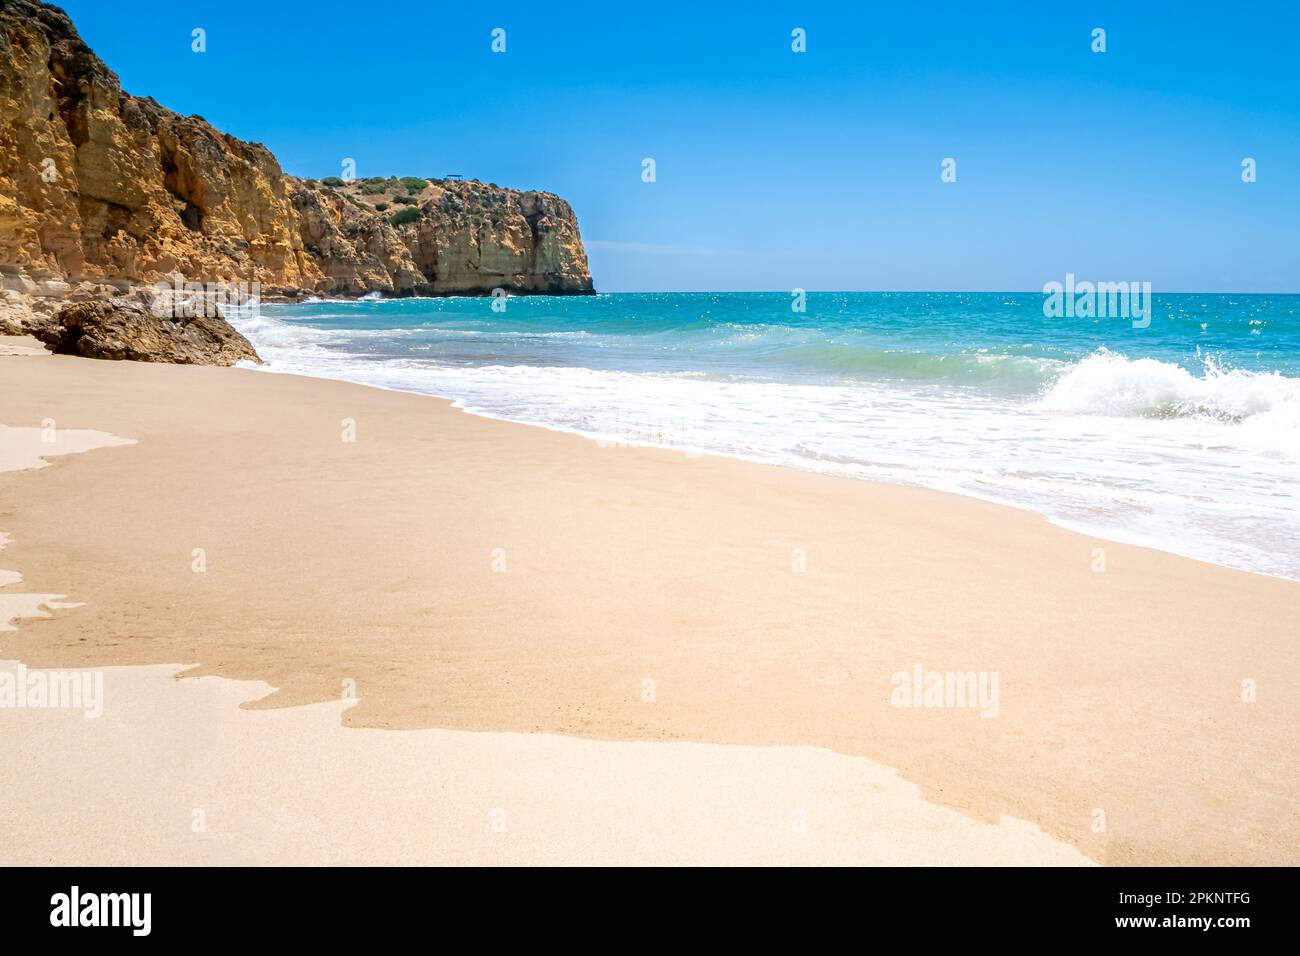 A picturesque and secluded Algarve beach, Praia do Canavial, boasts fine sand and blue waters with a small wave breaking under the bright sun. Stock Photo